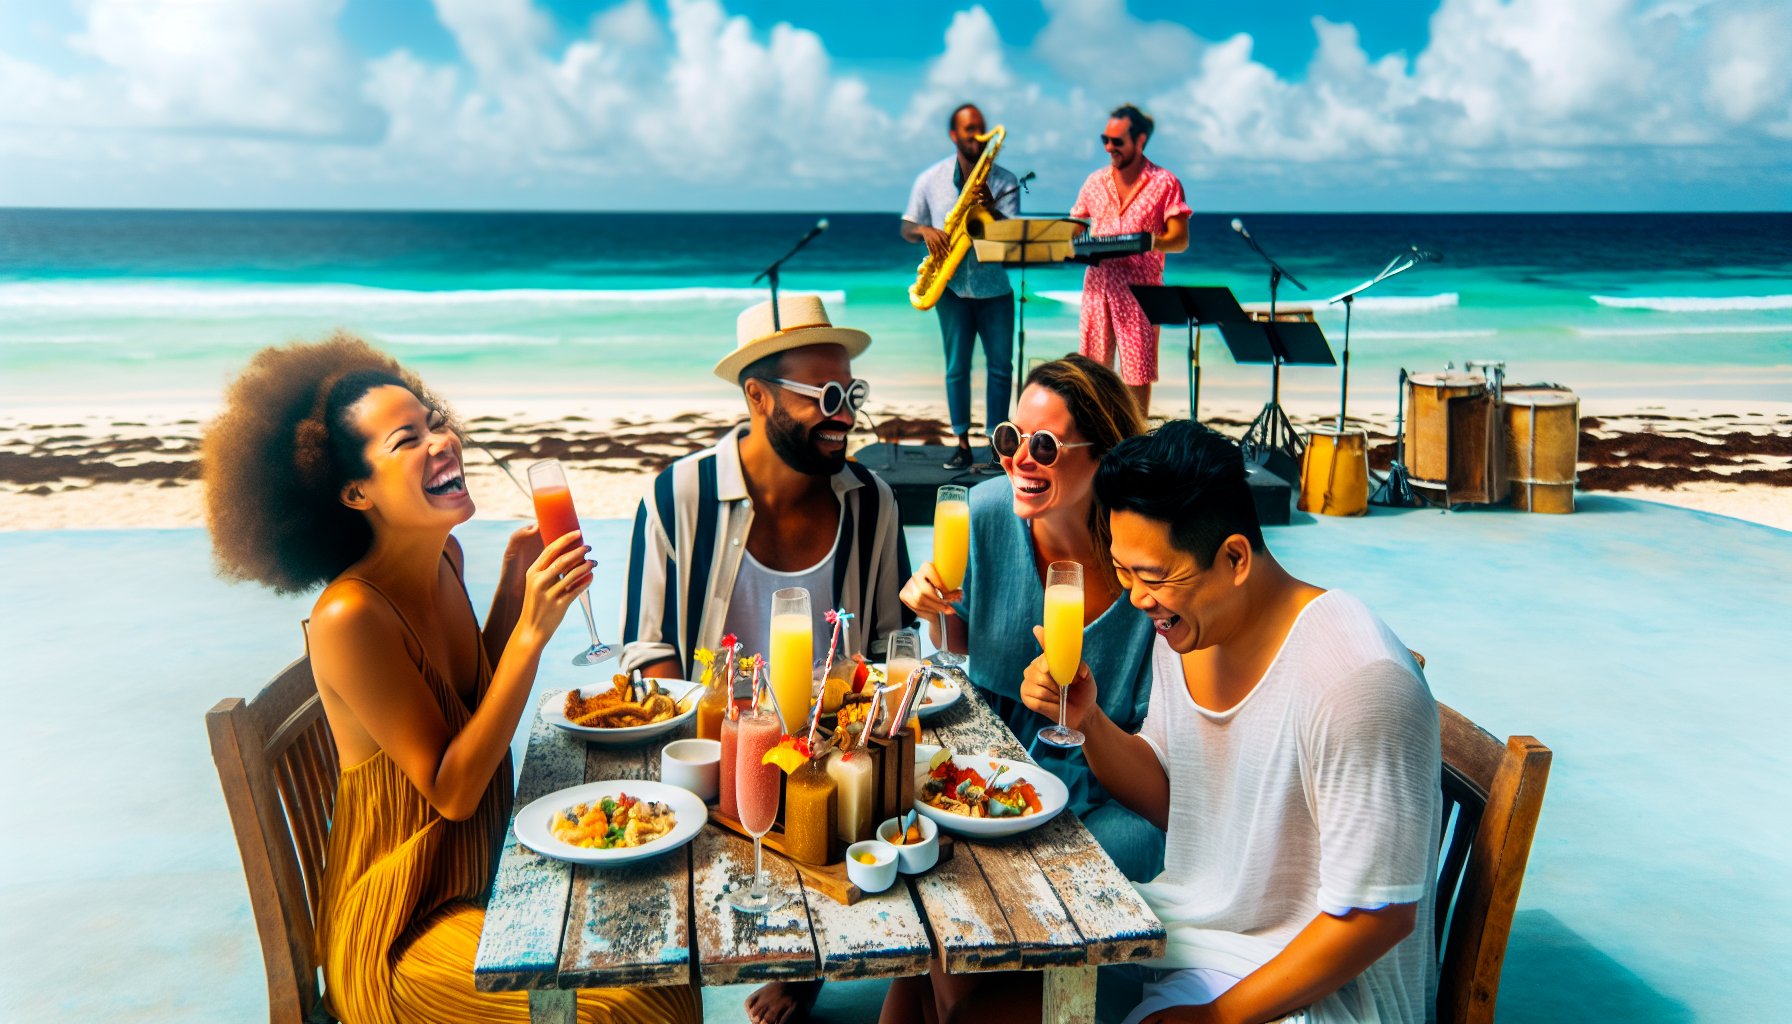 A beachside brunch with bottomless mimosas and live music